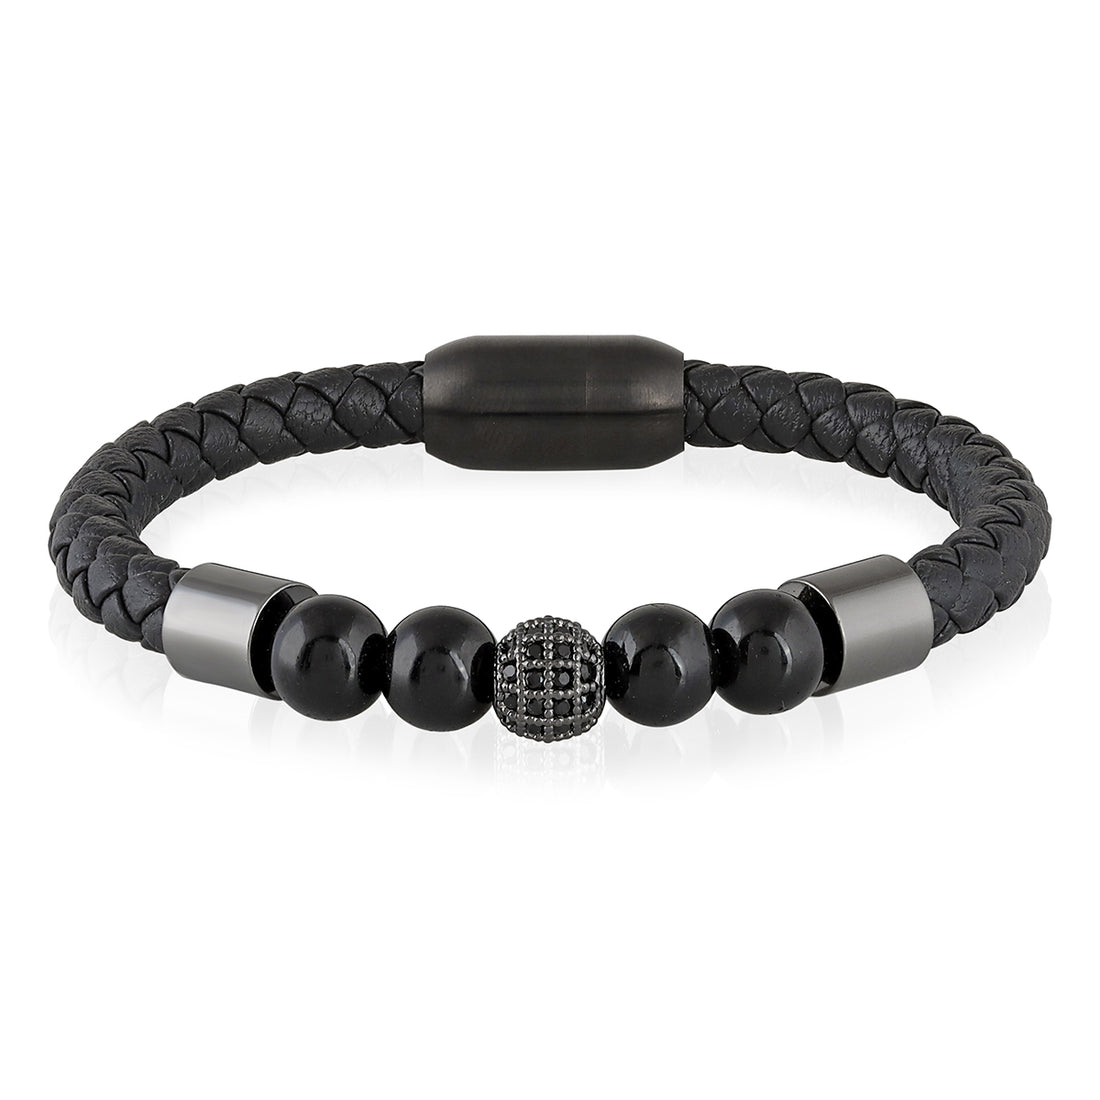 Black Onyx and Black Spinel Leather Bracelet with Magnetic Lock